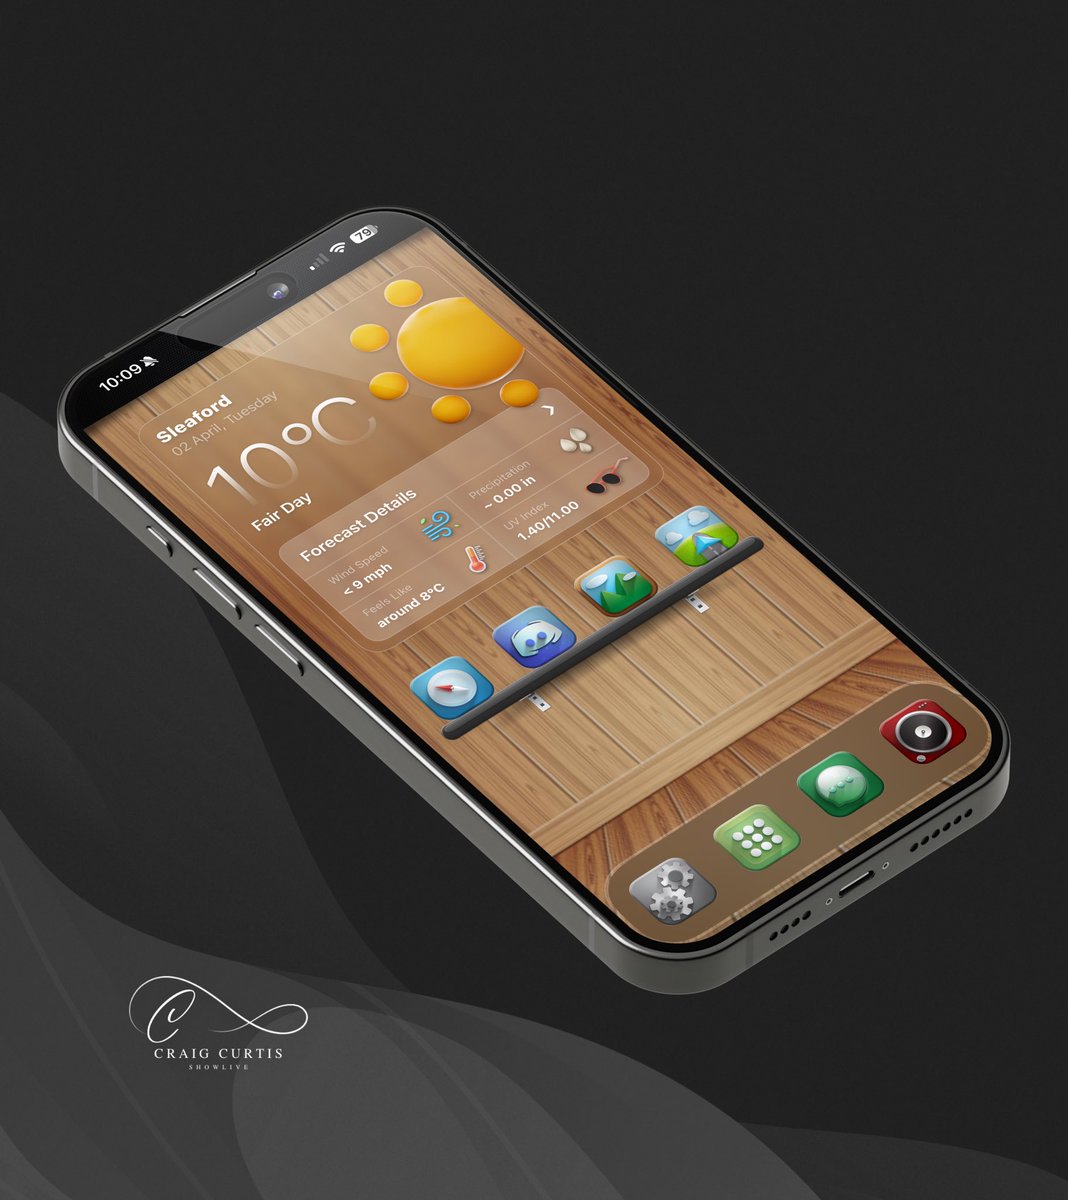 Evening 😀

Icons #AmbreV2 @frenchitouch 
AE @Attairdu57slm 
Wall @Thirdtemple
Widgy @Kmokhtar79 🙏🏼
Template @SeanKly 

#ios17 #nojailbreak #widgy #M ♥️